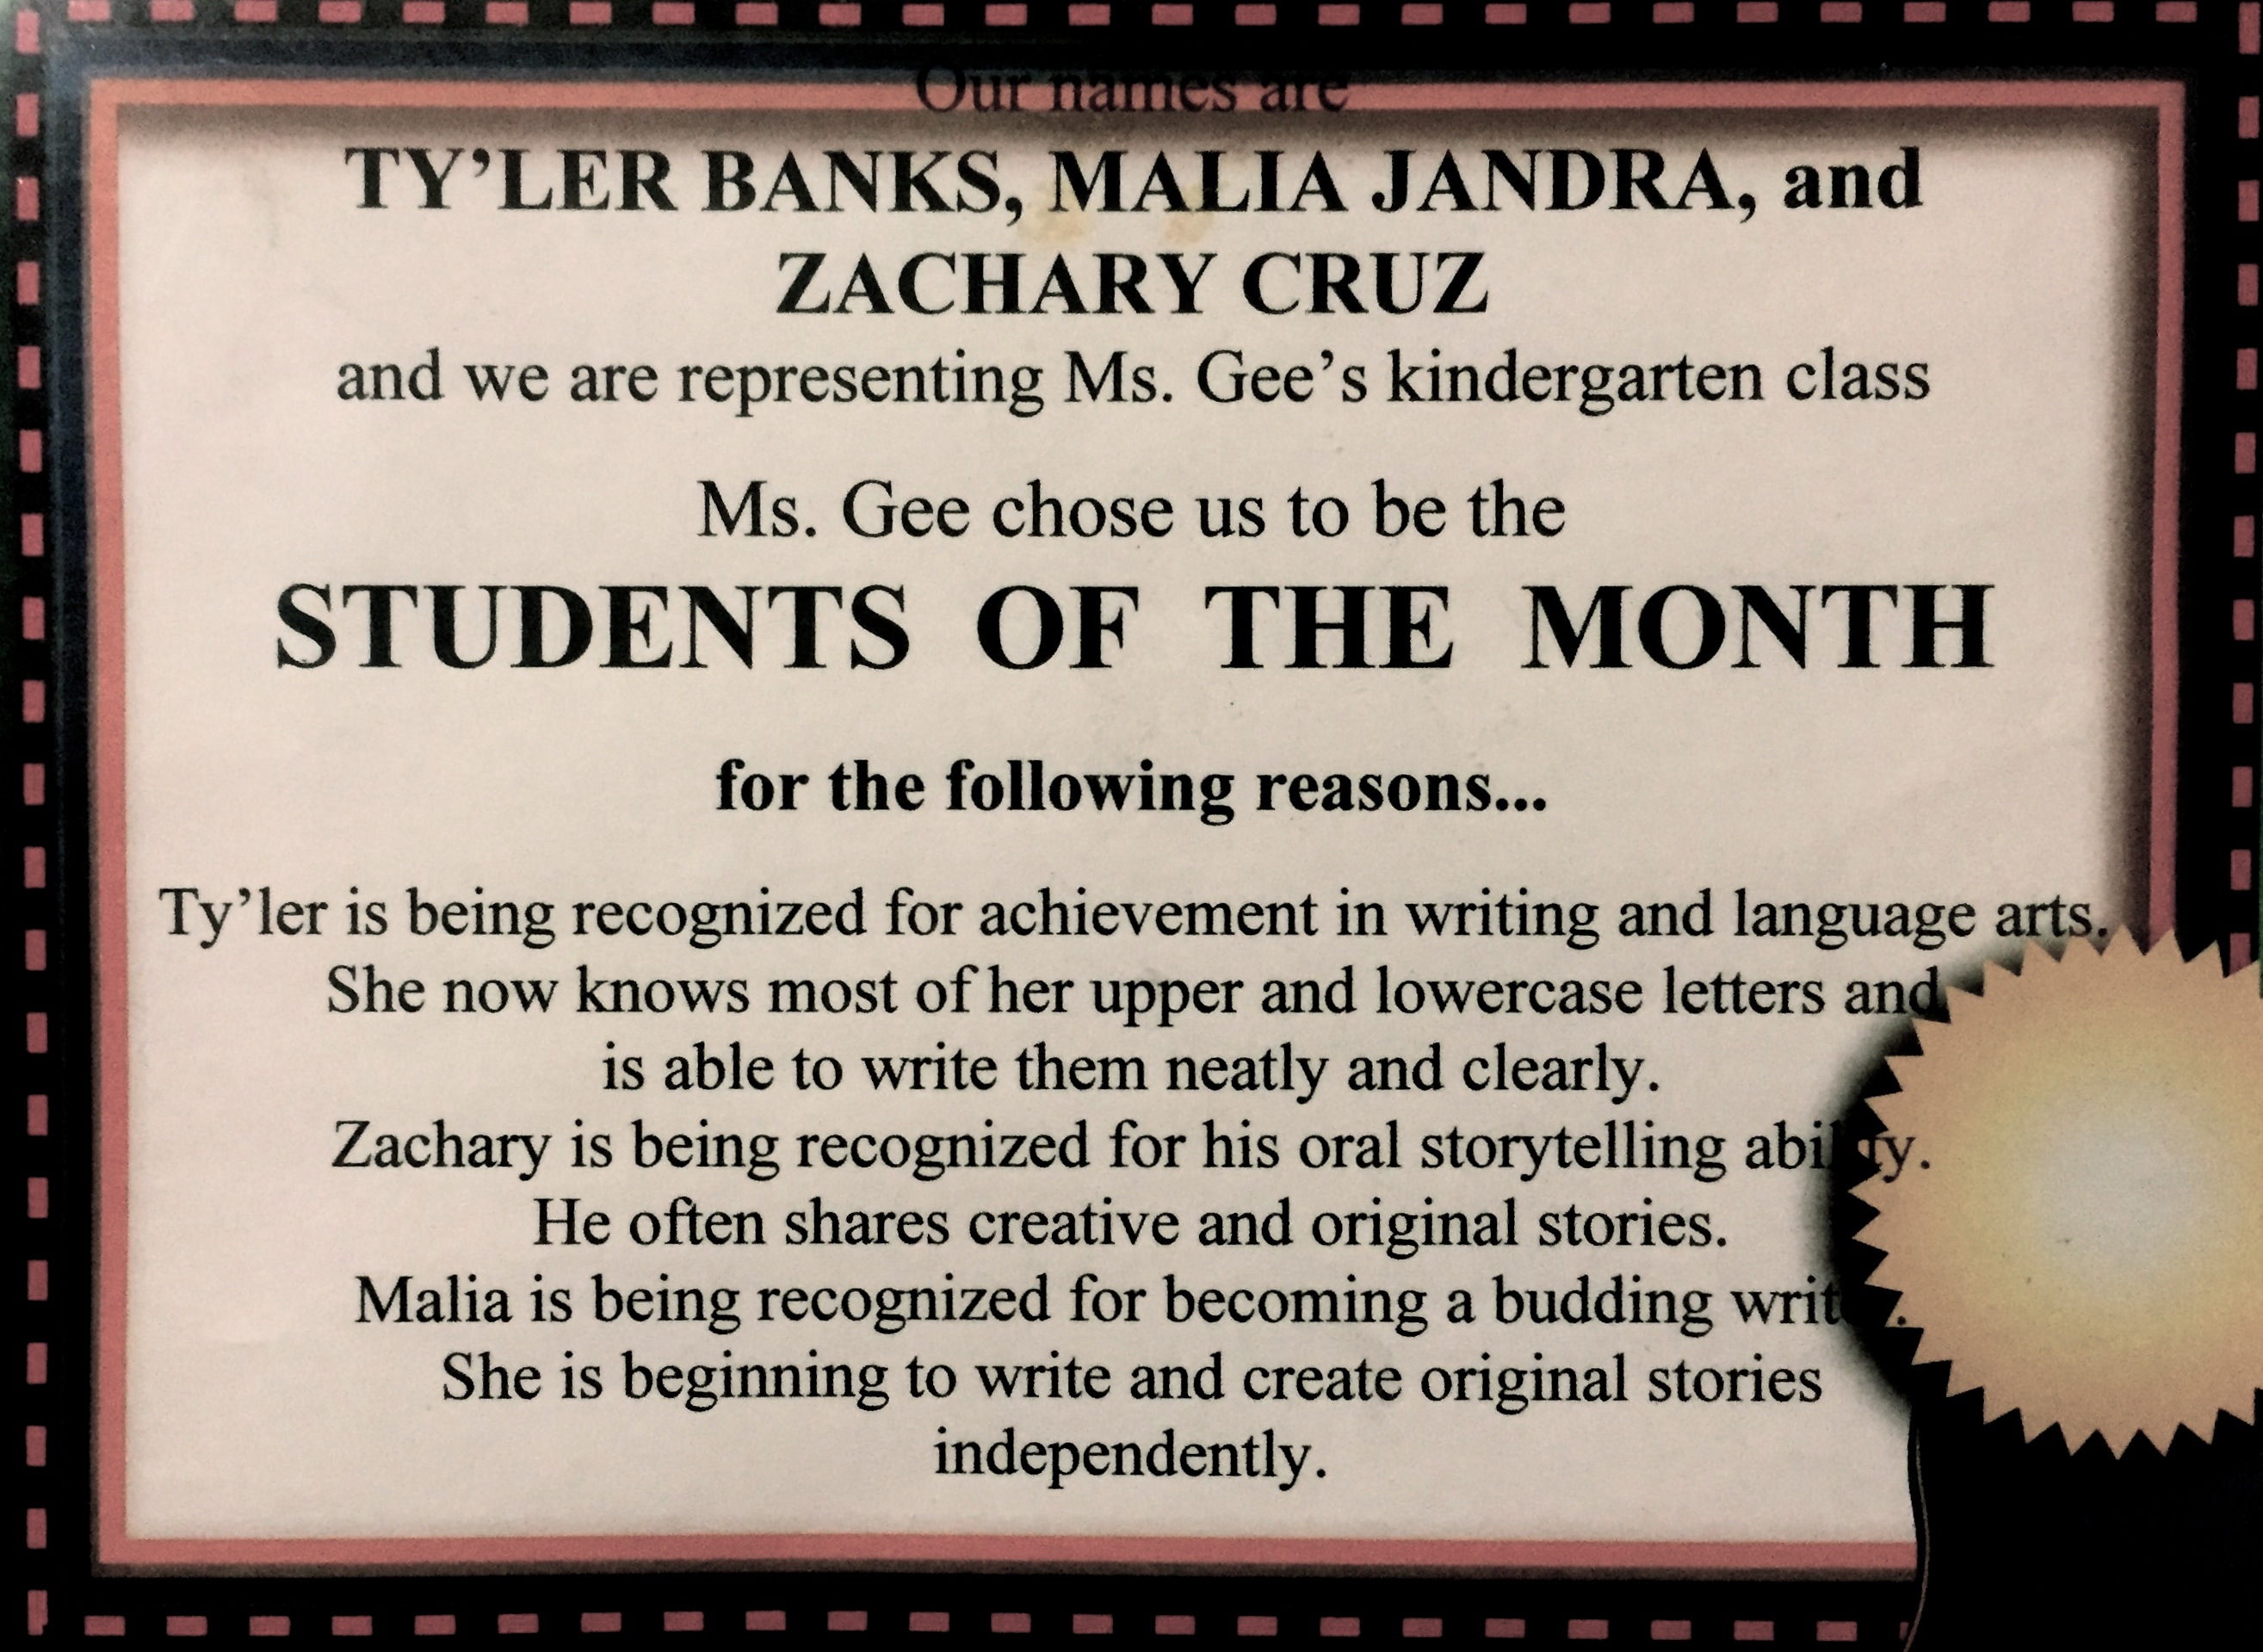 Receives Student of the Month Award